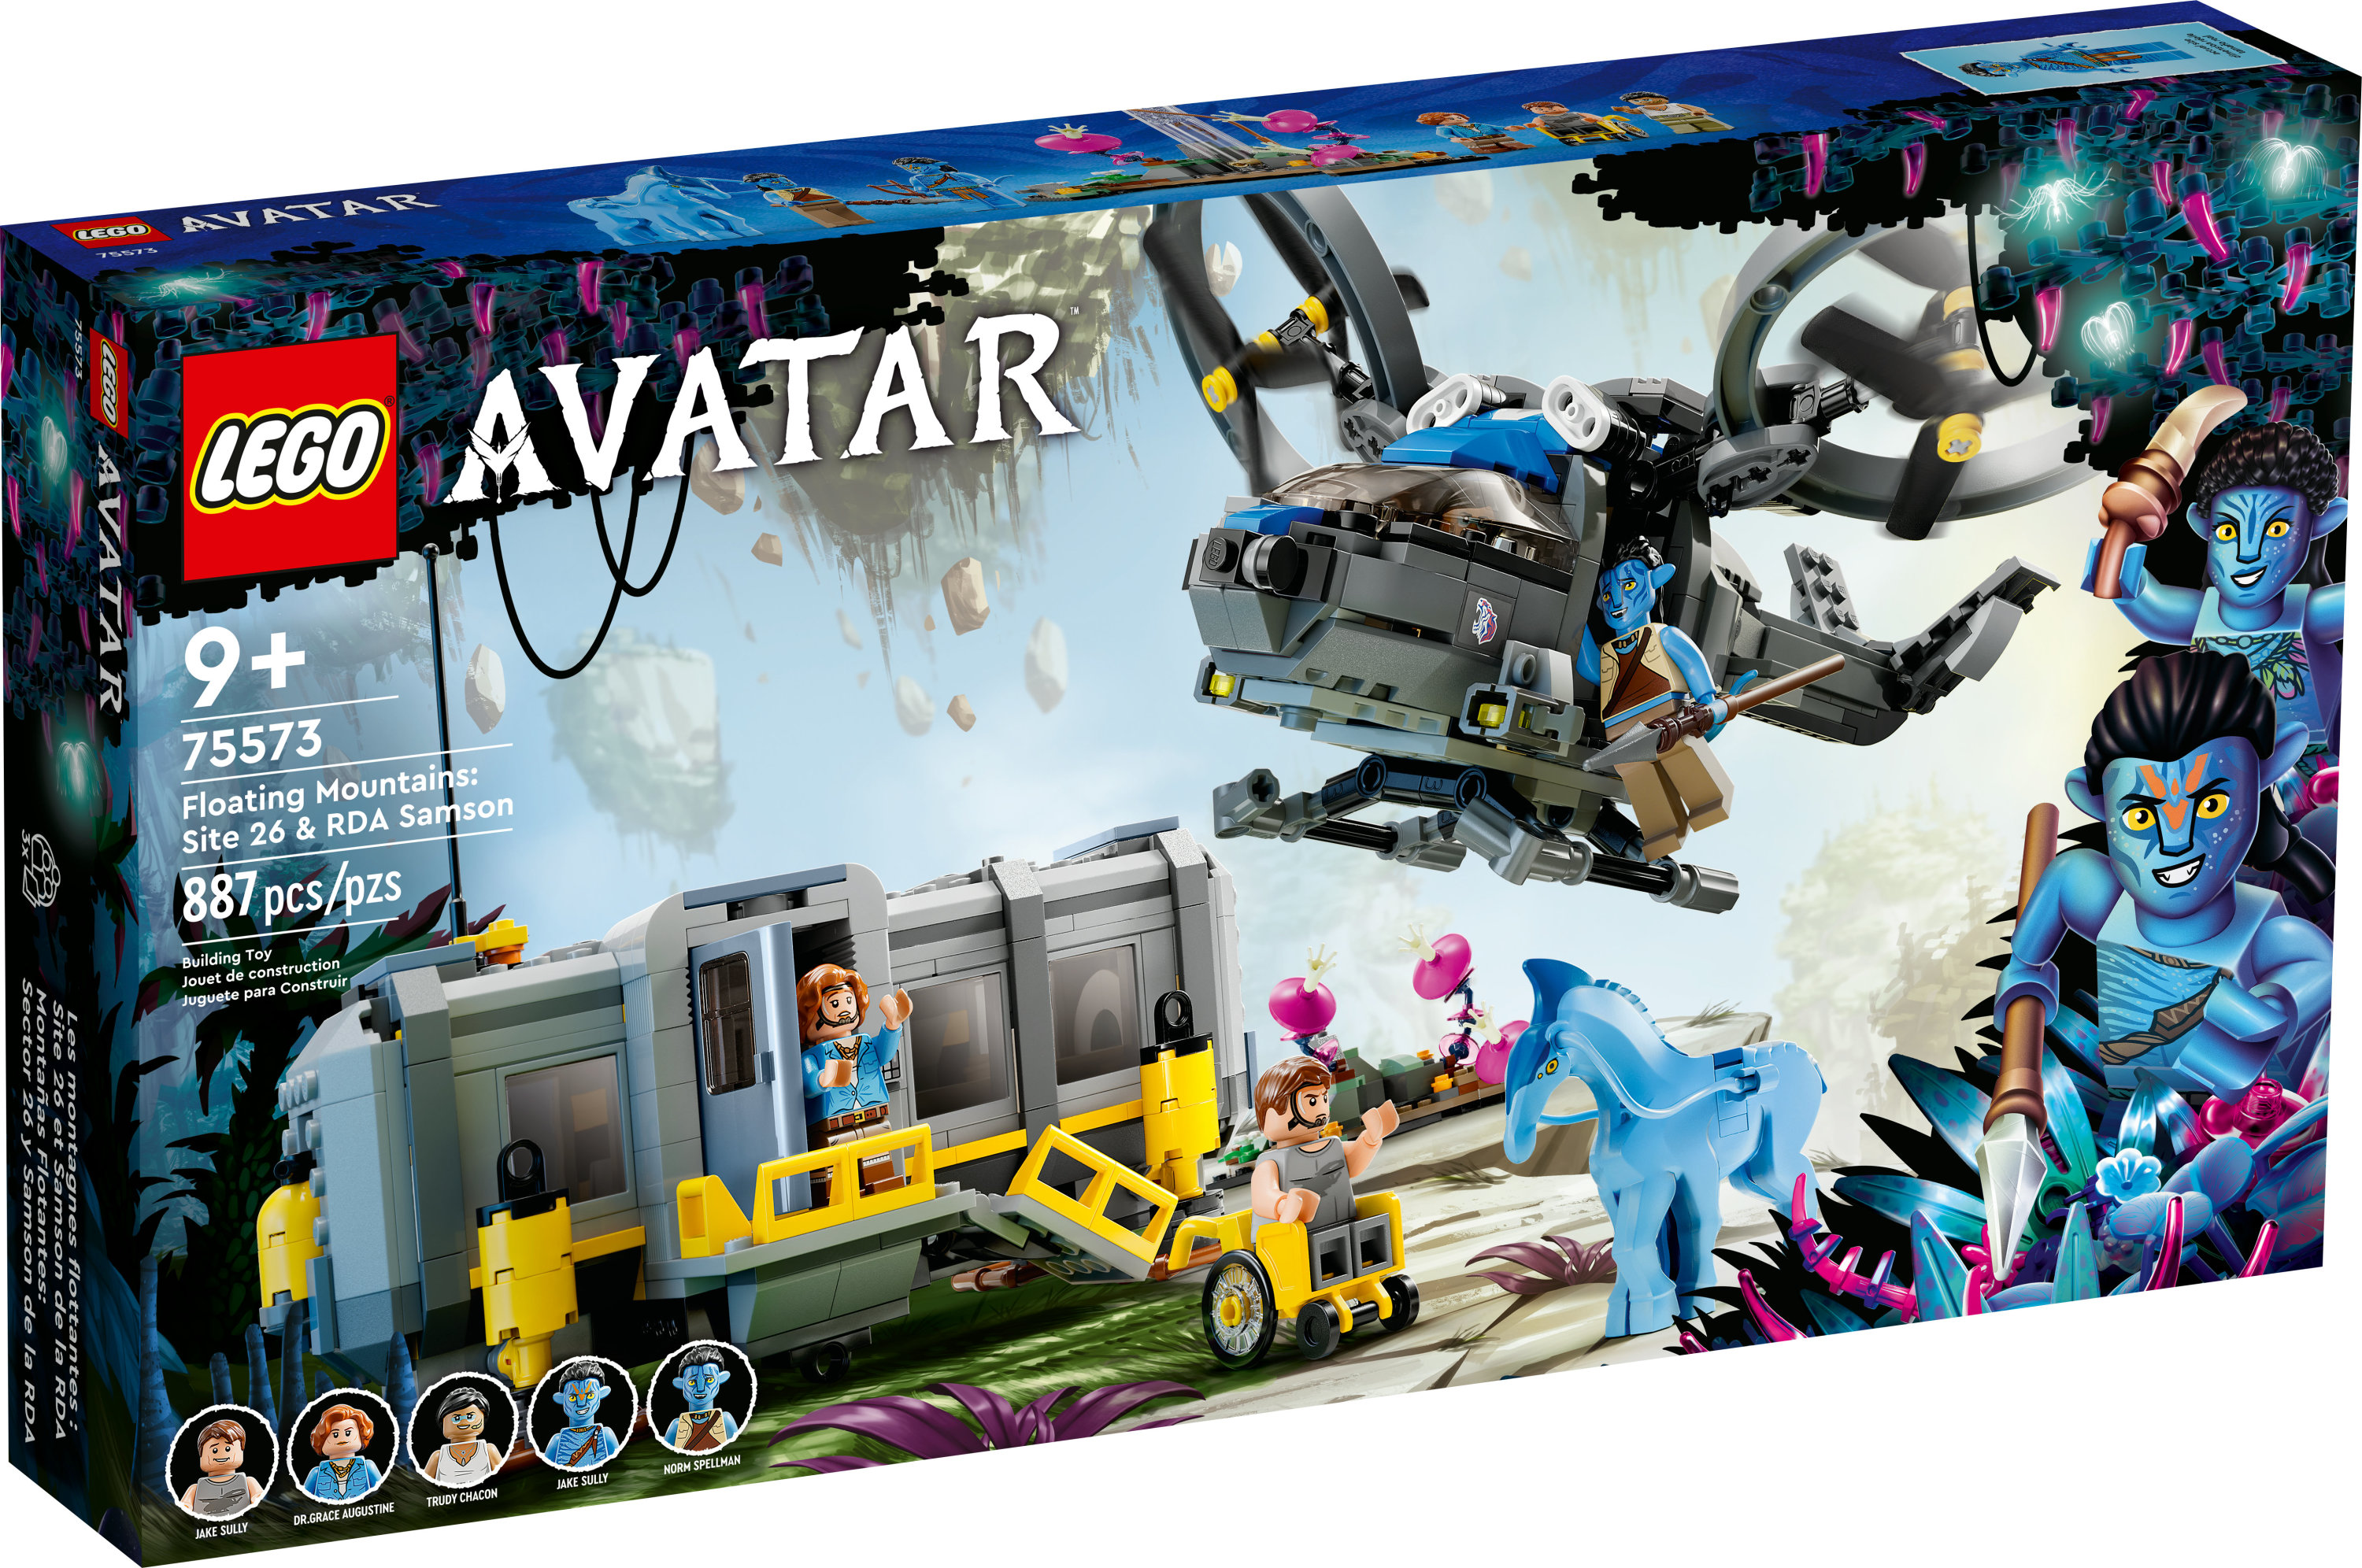 LEGO Avatar Floating Mountains Site 26 & RDA Samson 75573 Building Set - Helicopter Toy Featuring 5 Minifigures and Direhorse Animal Figure, Movie Inspired Set, Gift Idea for Kids Ages 9+ - image 2 of 7